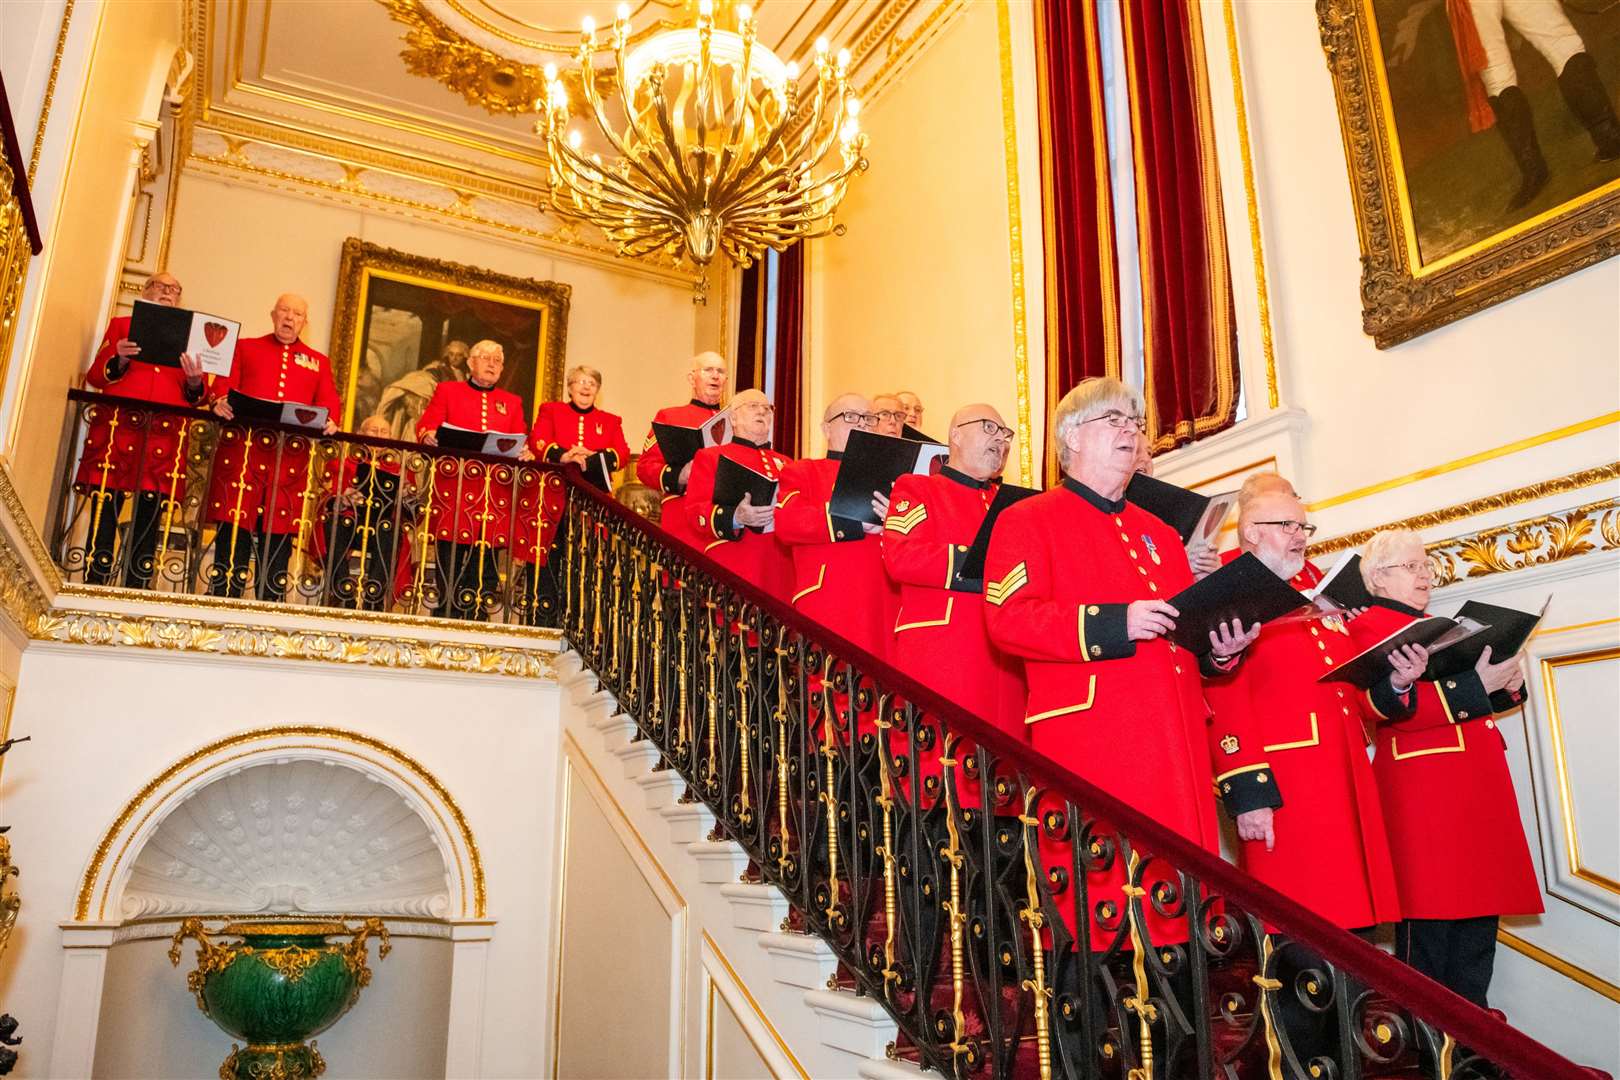 Chelsea Pensioners lined up on the stairs to sing Christmas carols.